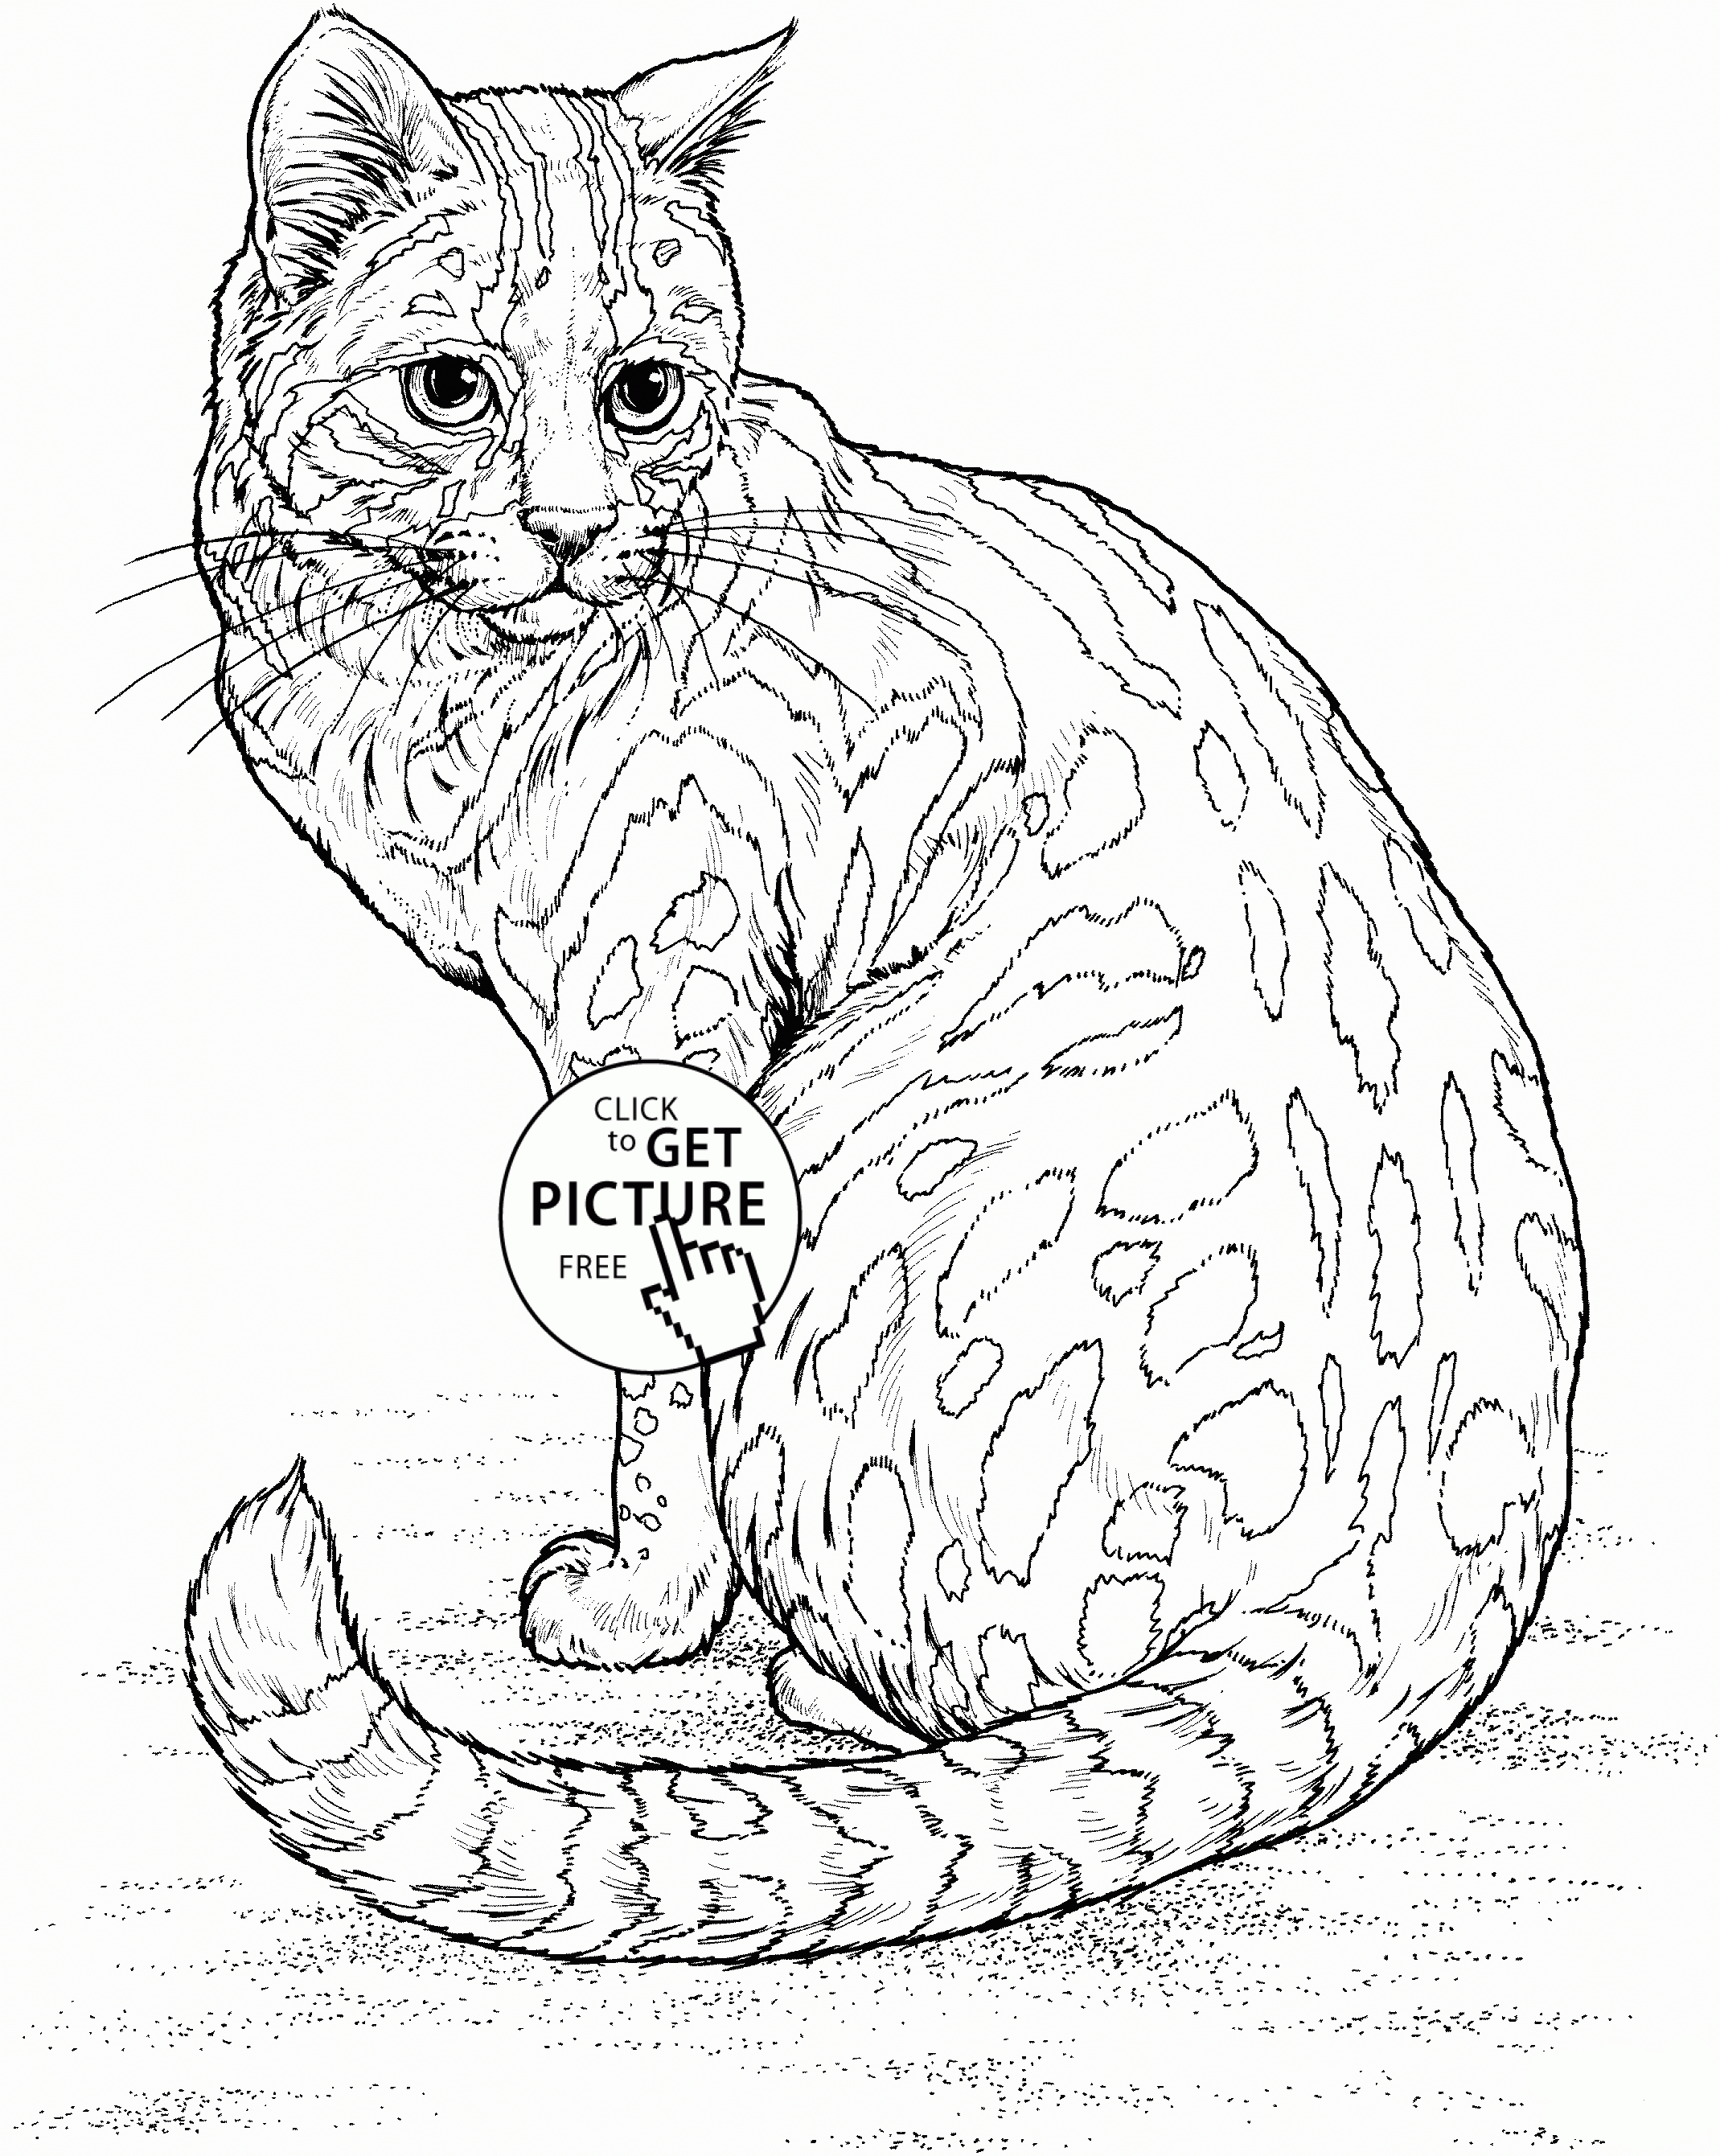 Realistic Cat Coloring Page For Kids, Animal Coloring Pages - Free Printable Realistic Animal Coloring Pages